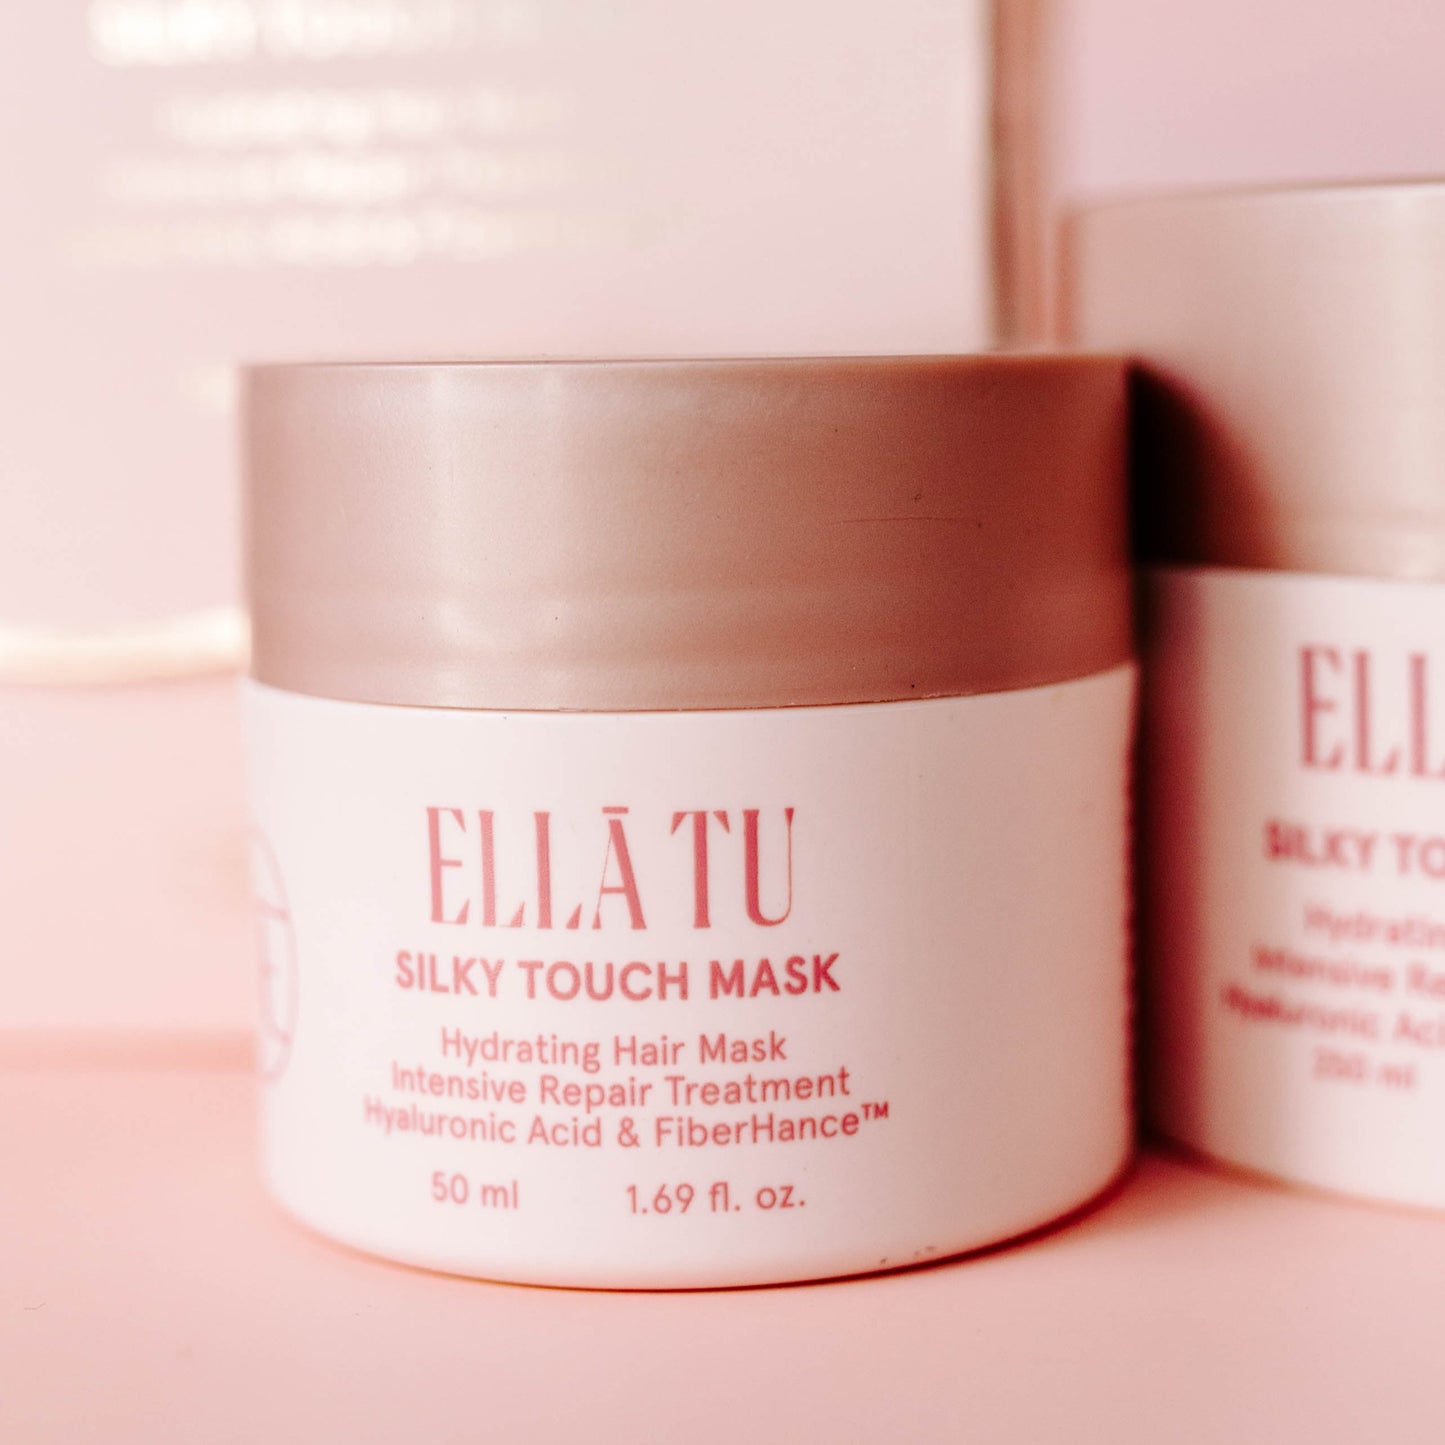 The travel size hair mask by Ellatu. Take your routine with you, where ever you go. Enriched with our deeply hydrating, nourishing formula with Fiberhance, Hyaluronic Acid, Moringa Oil, Castor Oil and Gold Vitamin E capsules, for deep conditioning, moisturizing and bond building.